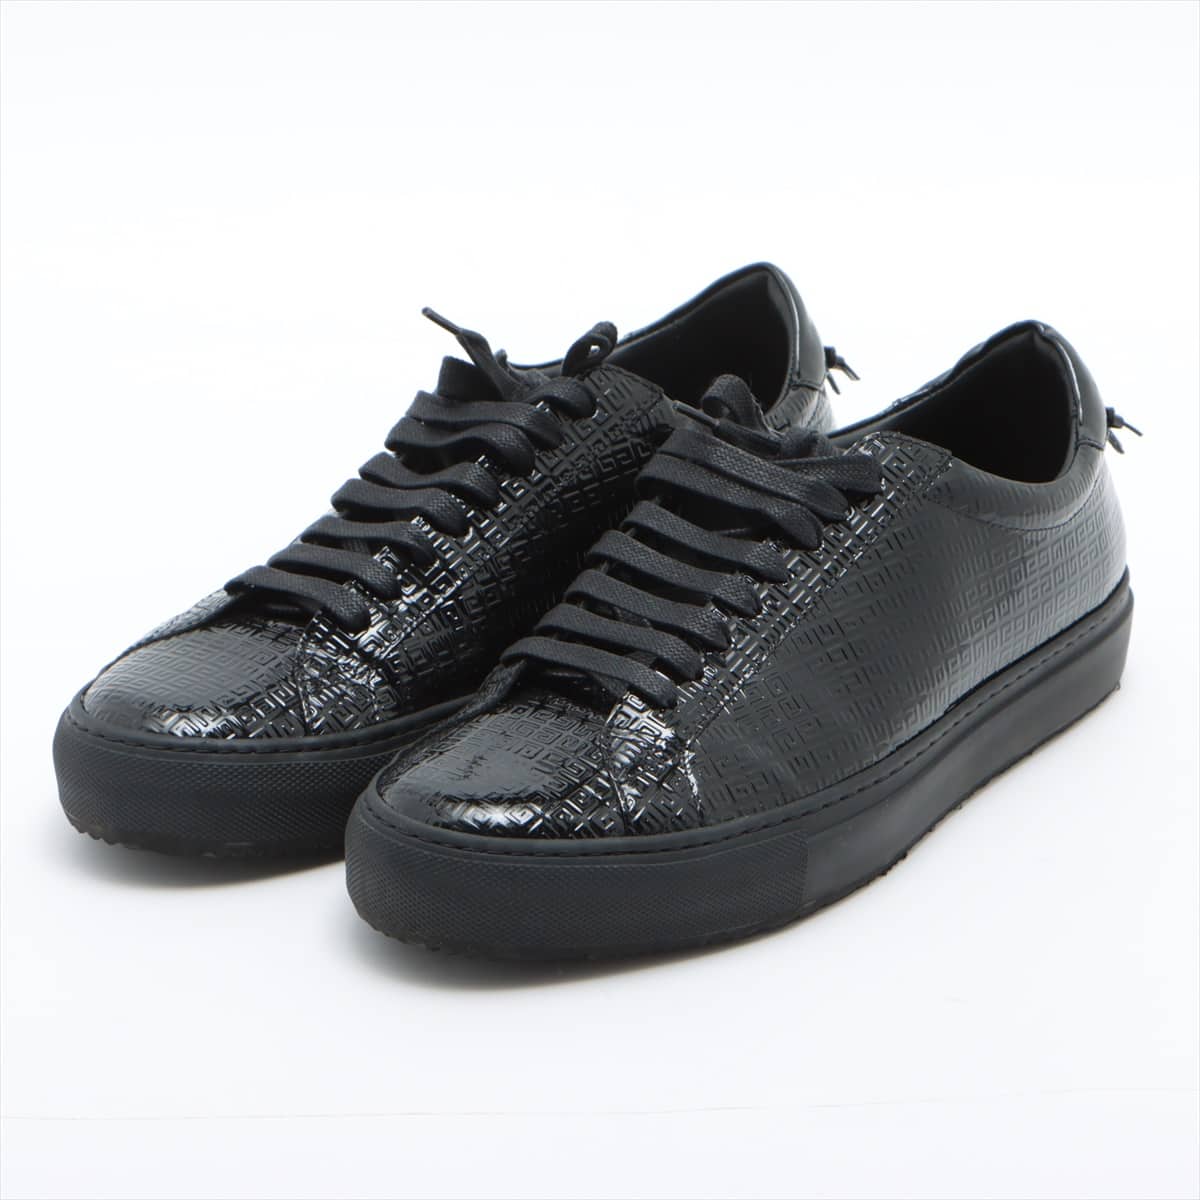 Givenchy 4G 21 years Patent leather Sneakers 42 Men's Black URBAN STREET